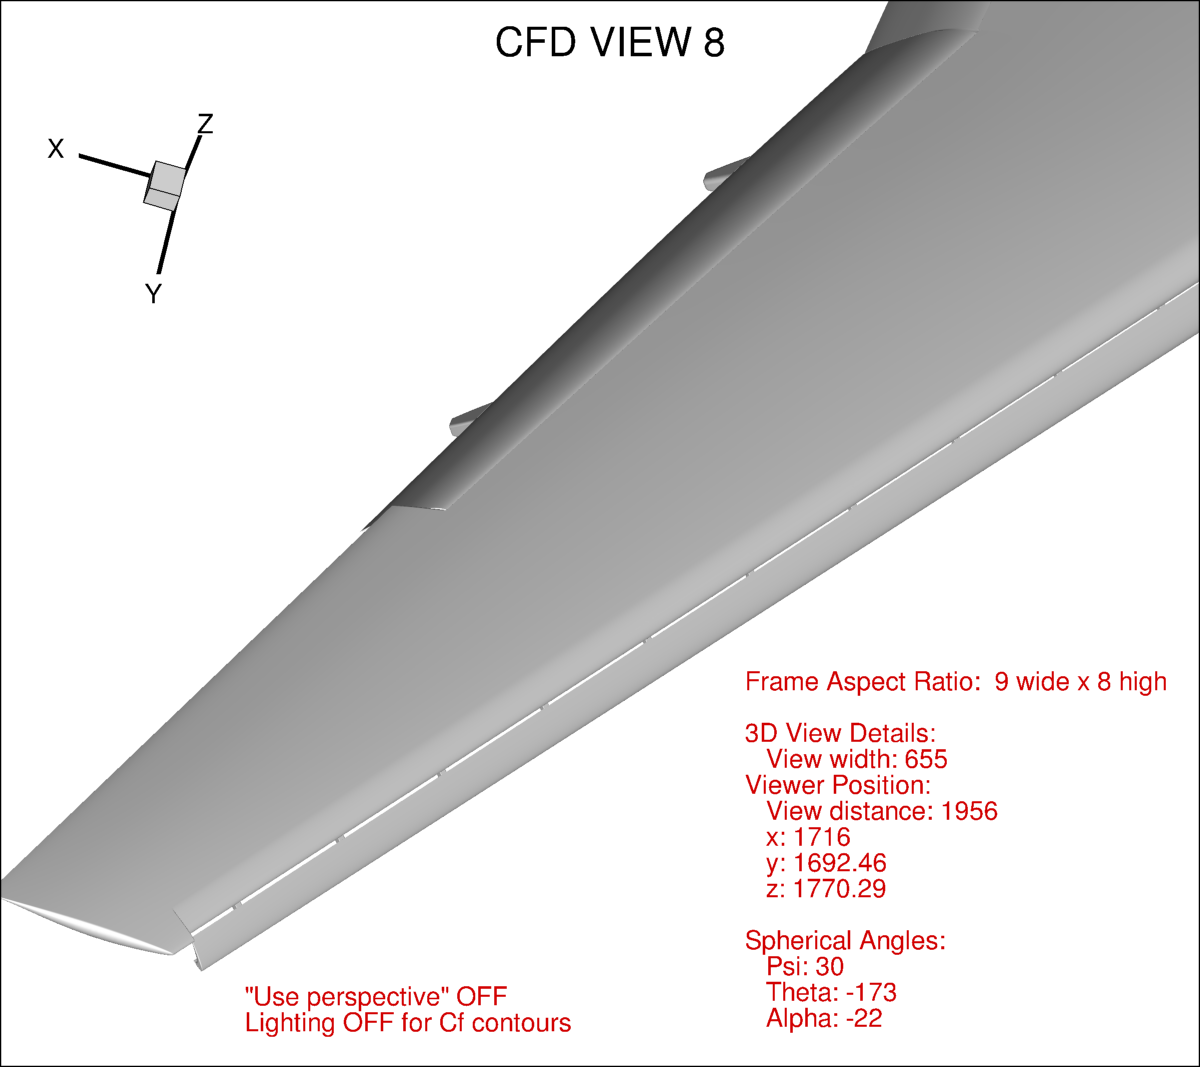 Example CFD view #8